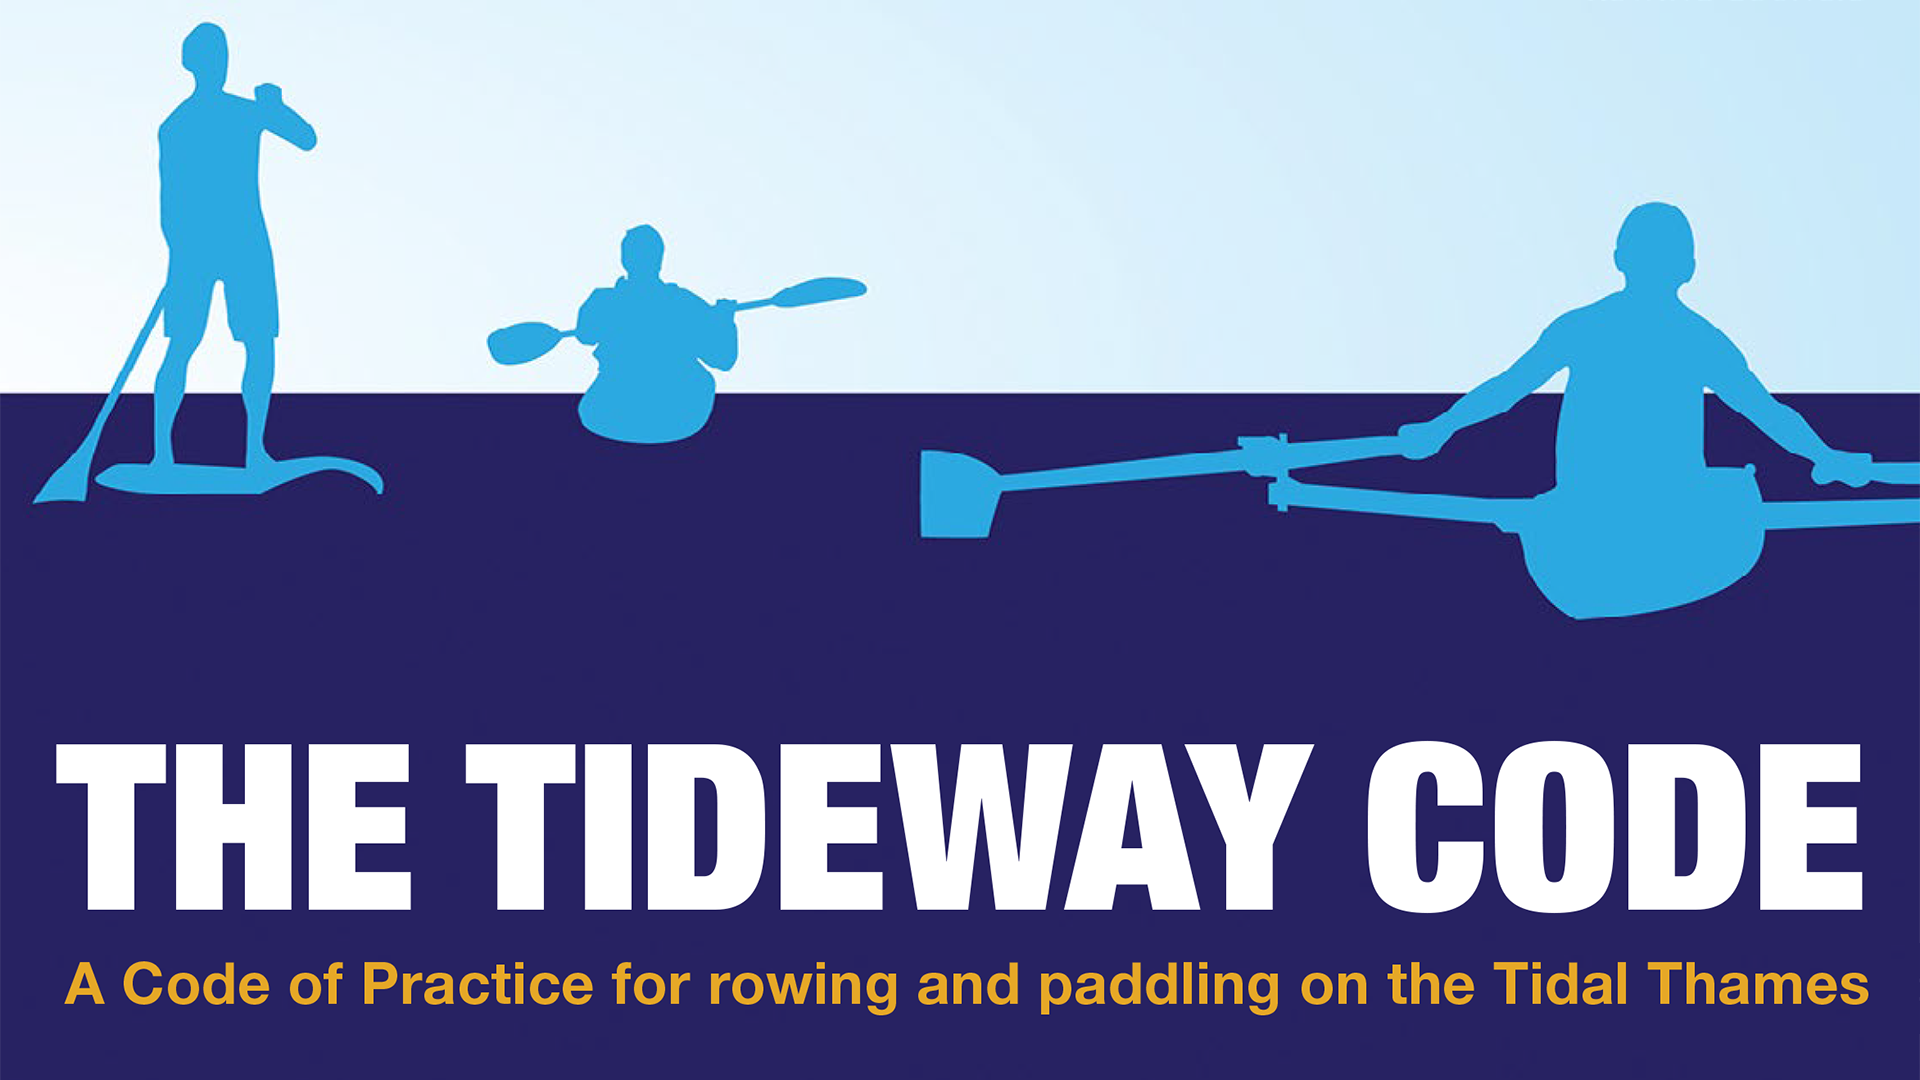 Every watersports participant should know The Tideway Code